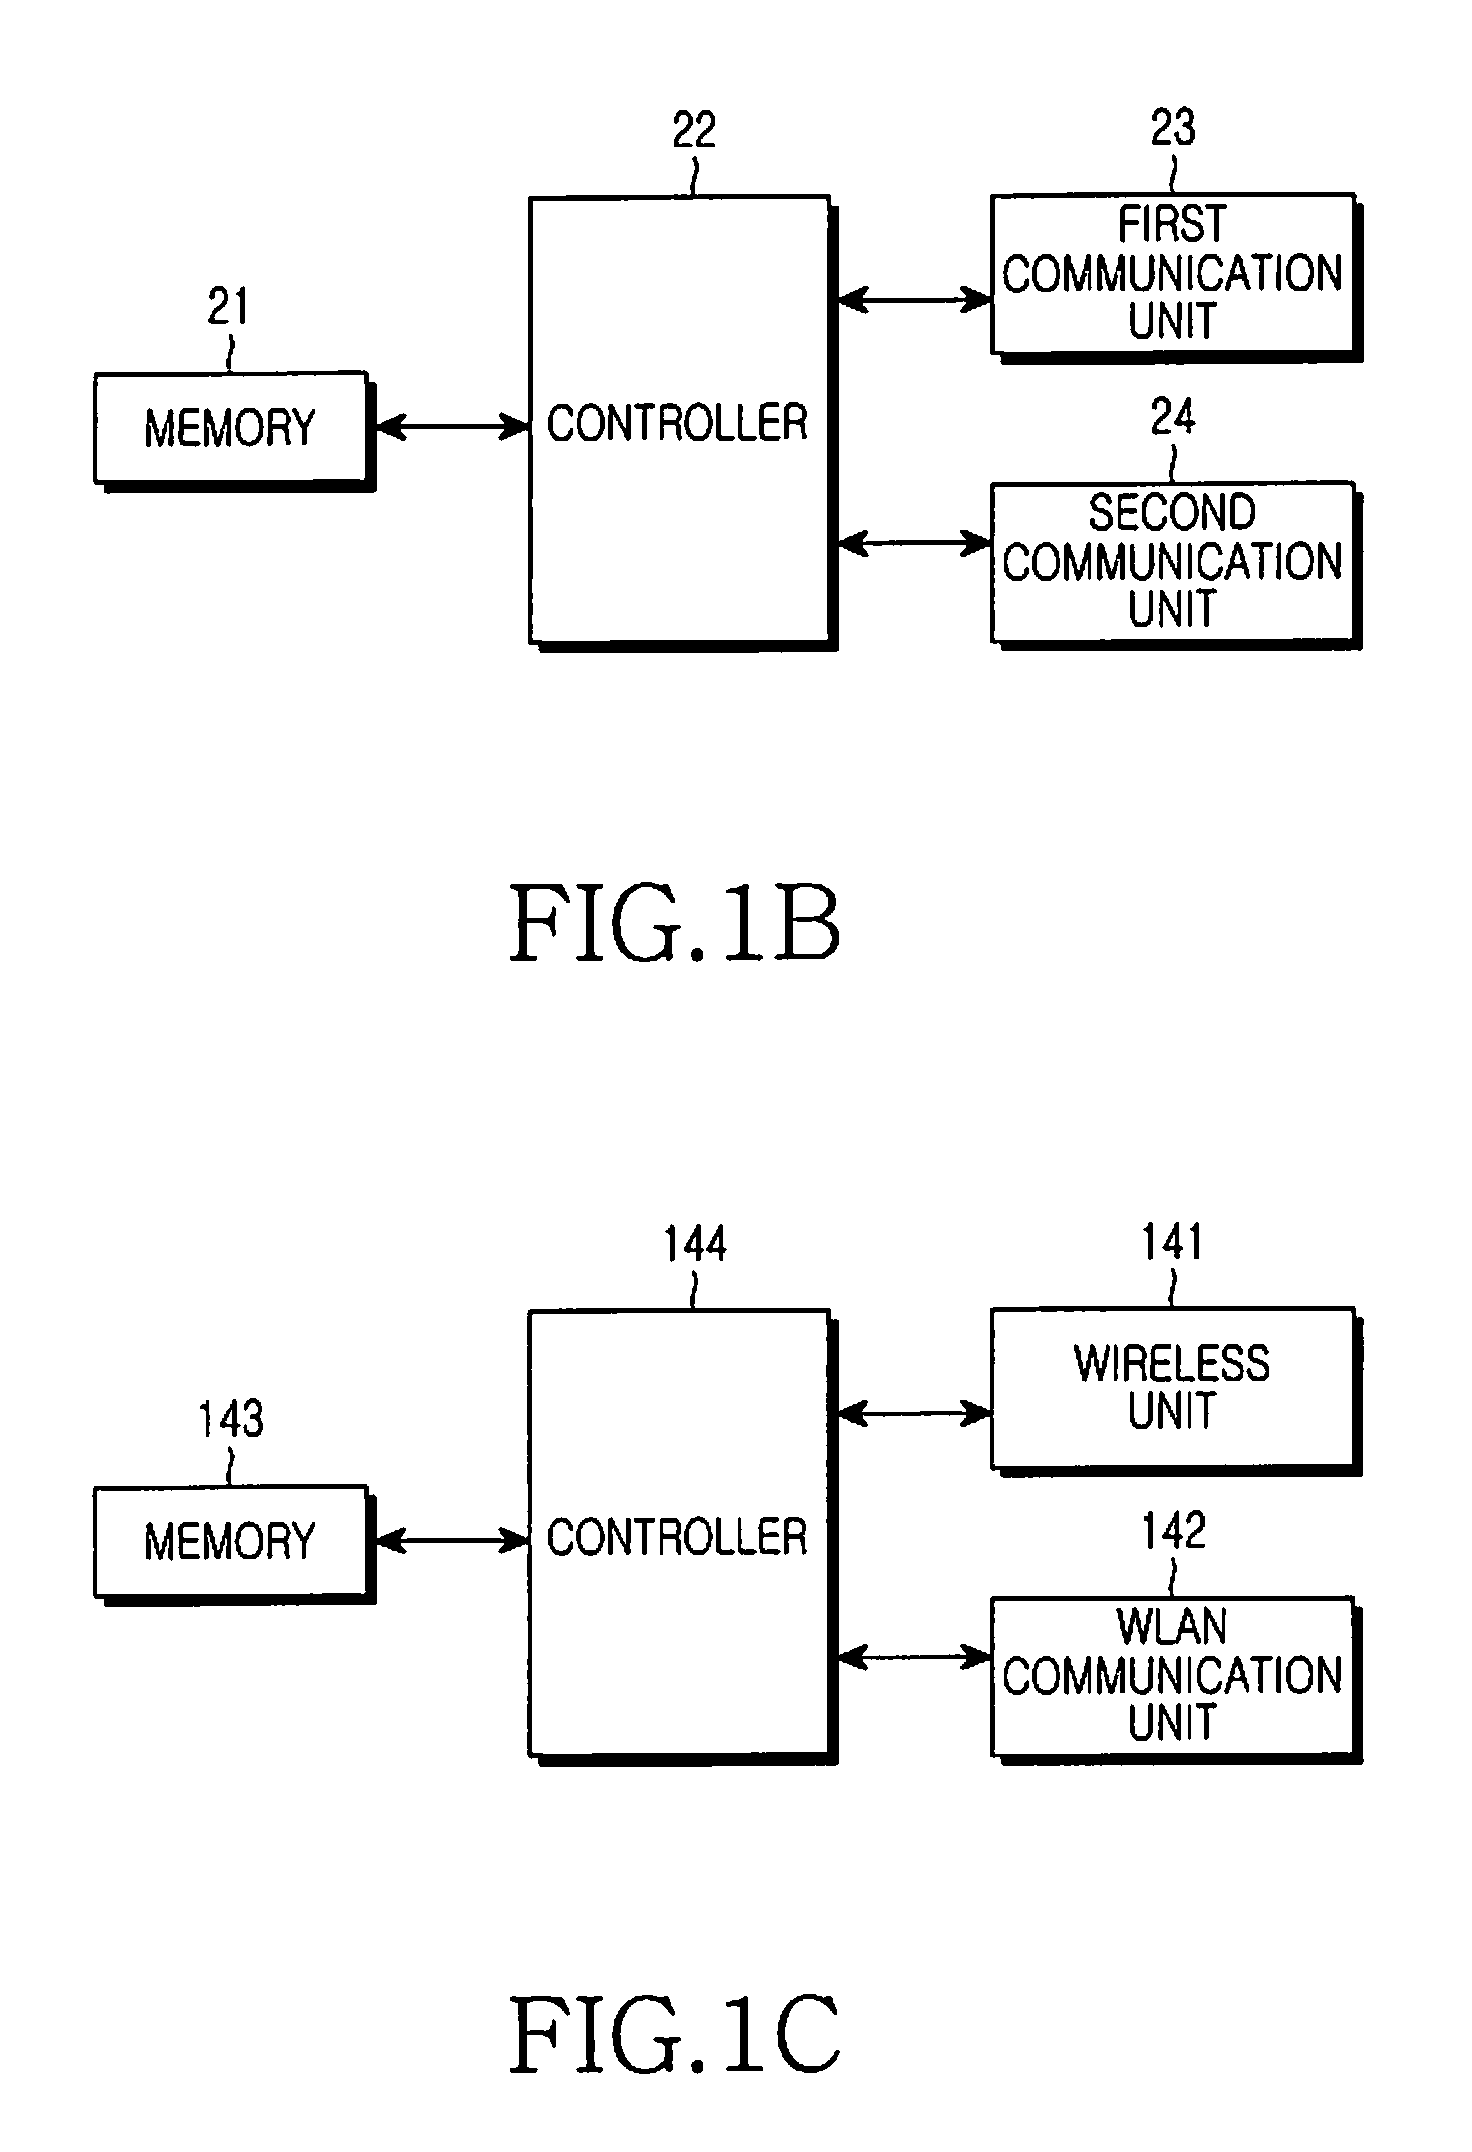 Method and system for connecting mobile communication terminal with access point